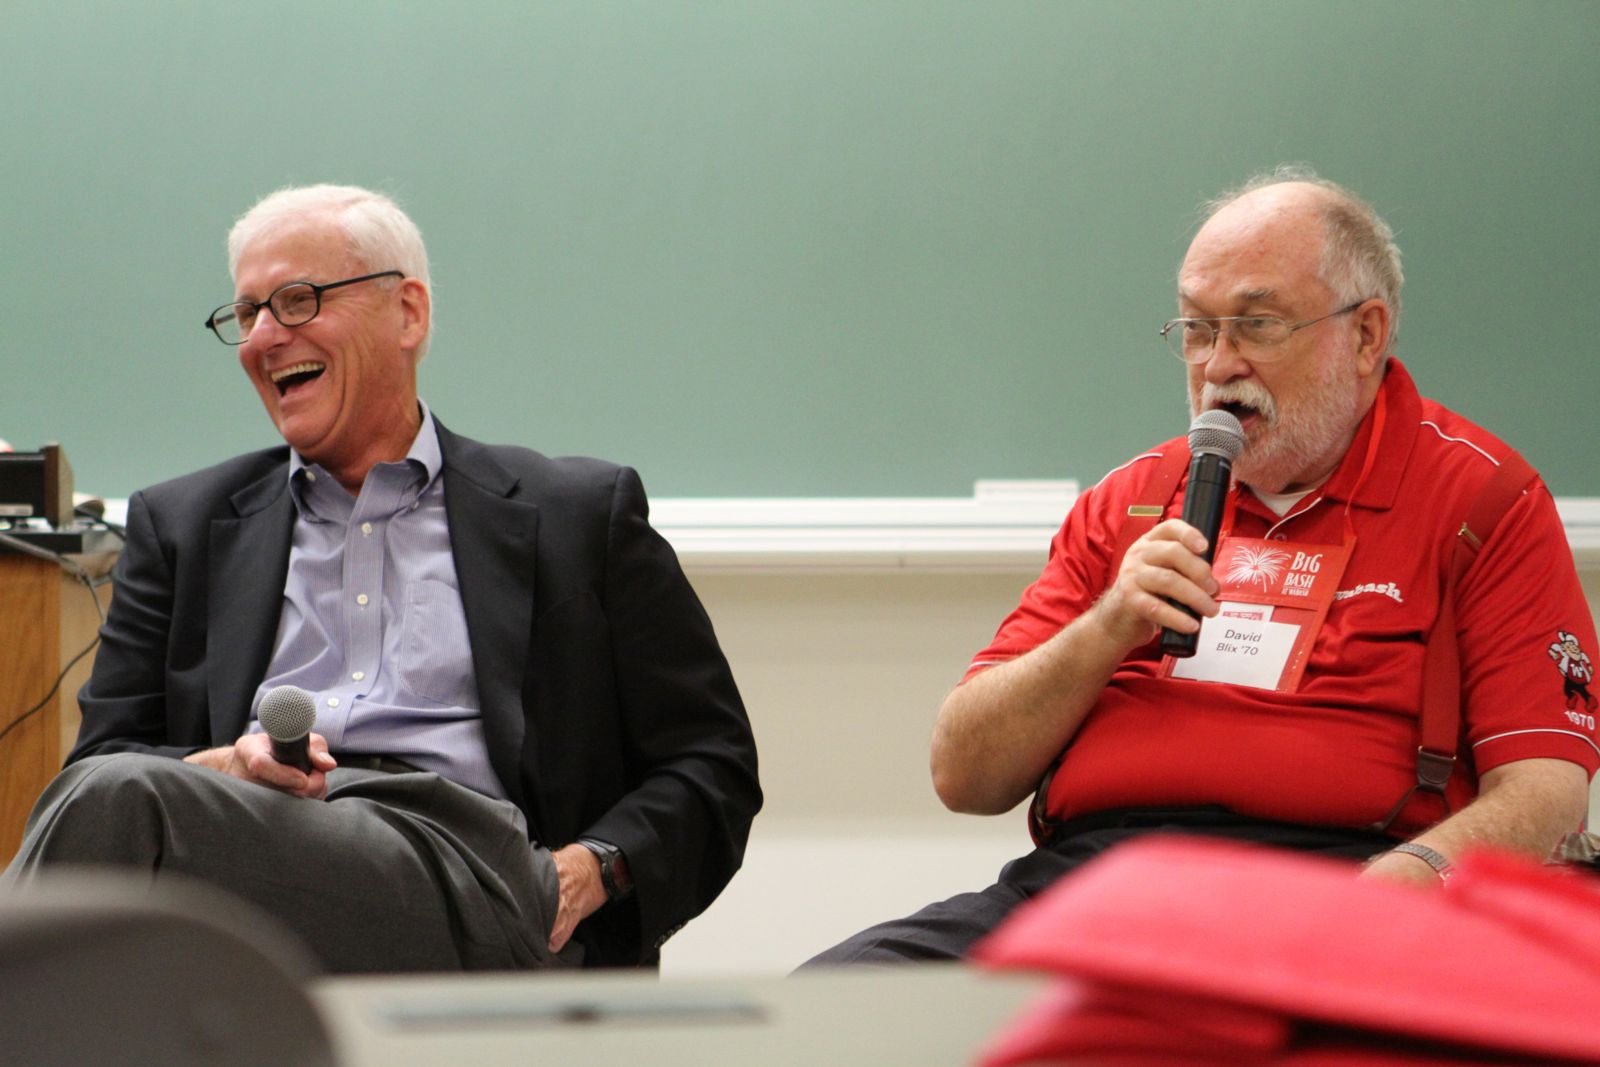 Lots of laughs, smiles and stories were shared amongst alumni.